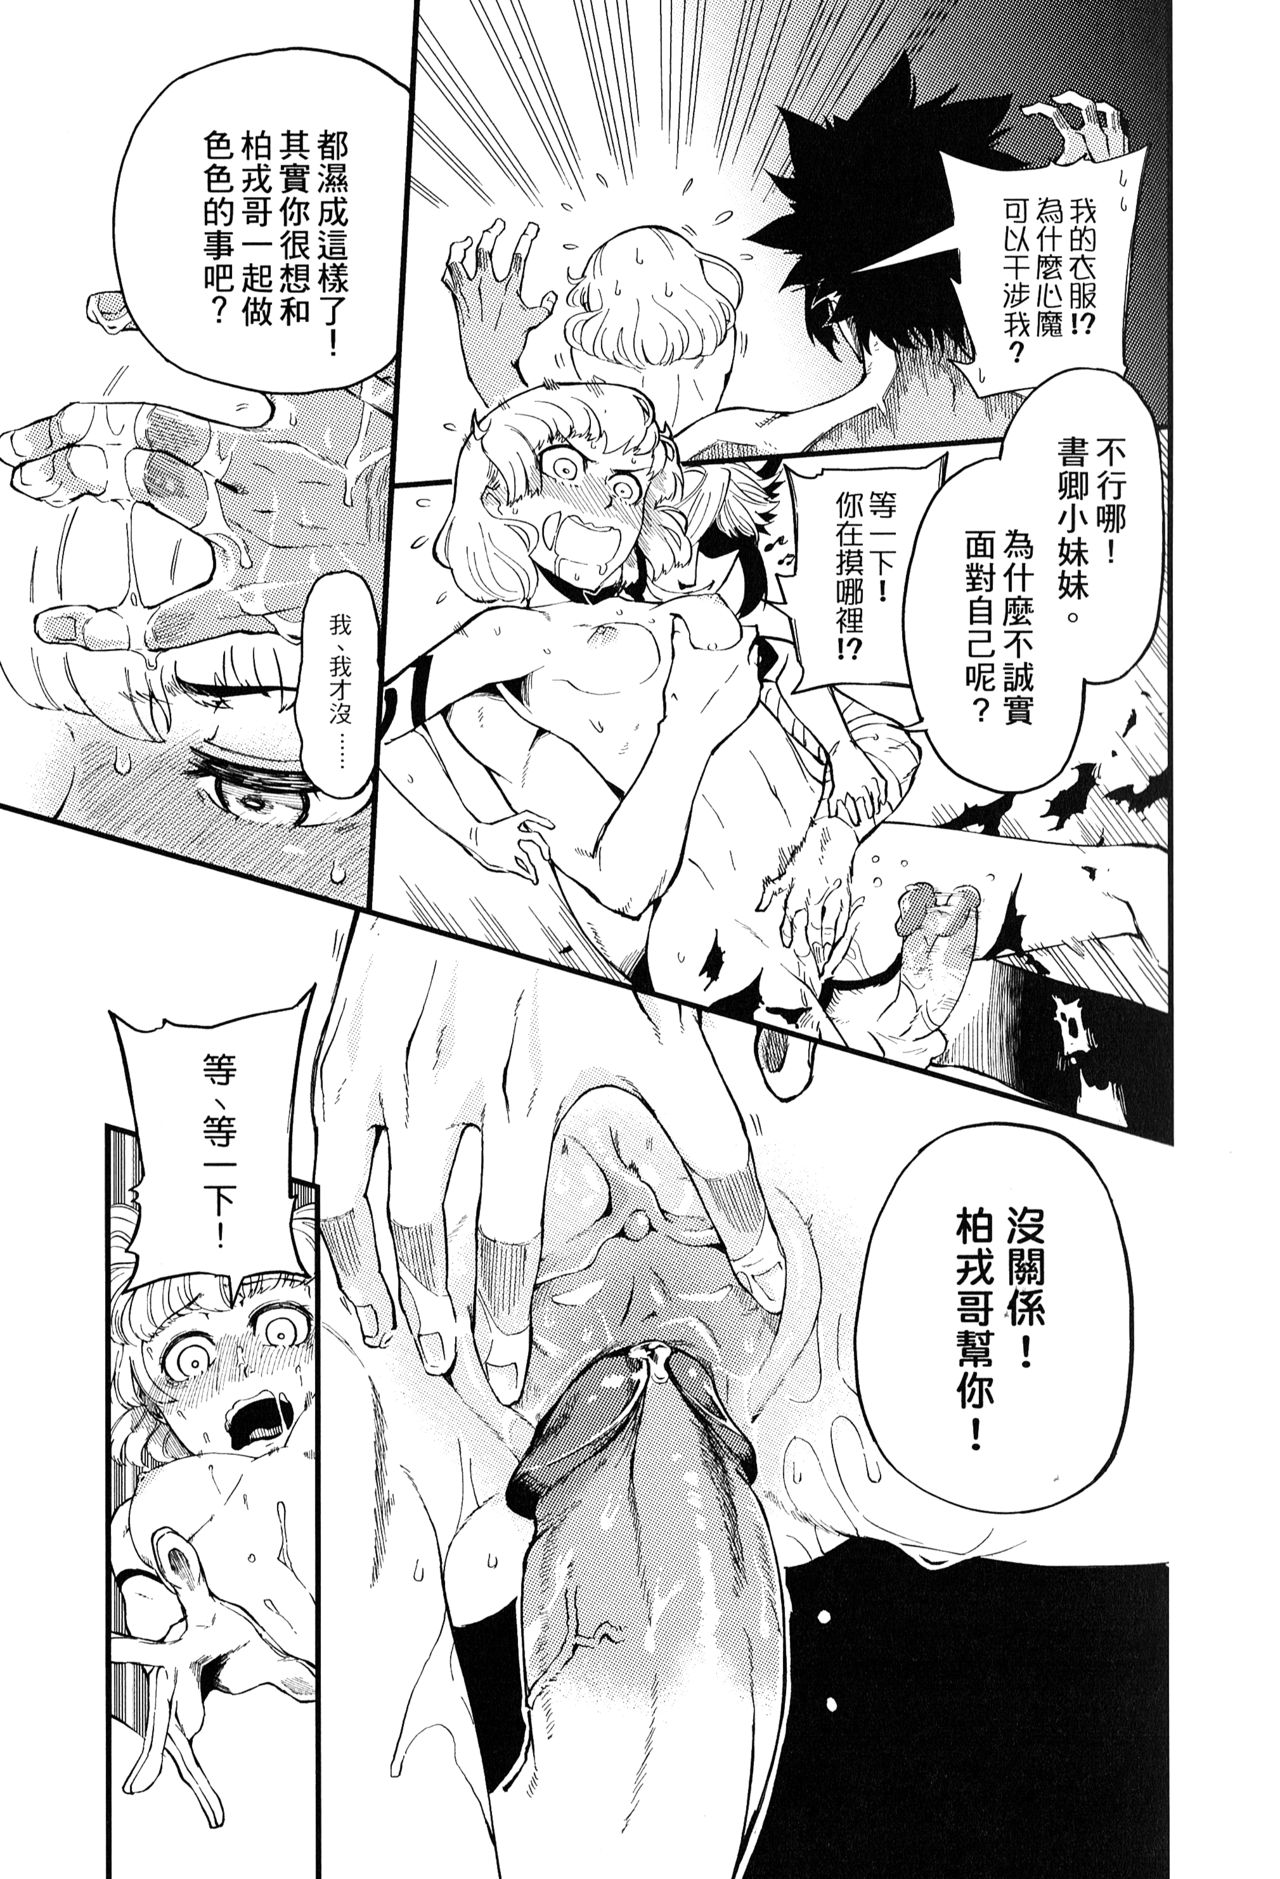 (FF28)  [Coin]  Do not worry!! There's not have any sacrilegious in this Dōjinshi!! [Chinese] (FF28)  [Coin]  安心！！不會天譴的天譴本！！ [中国語]